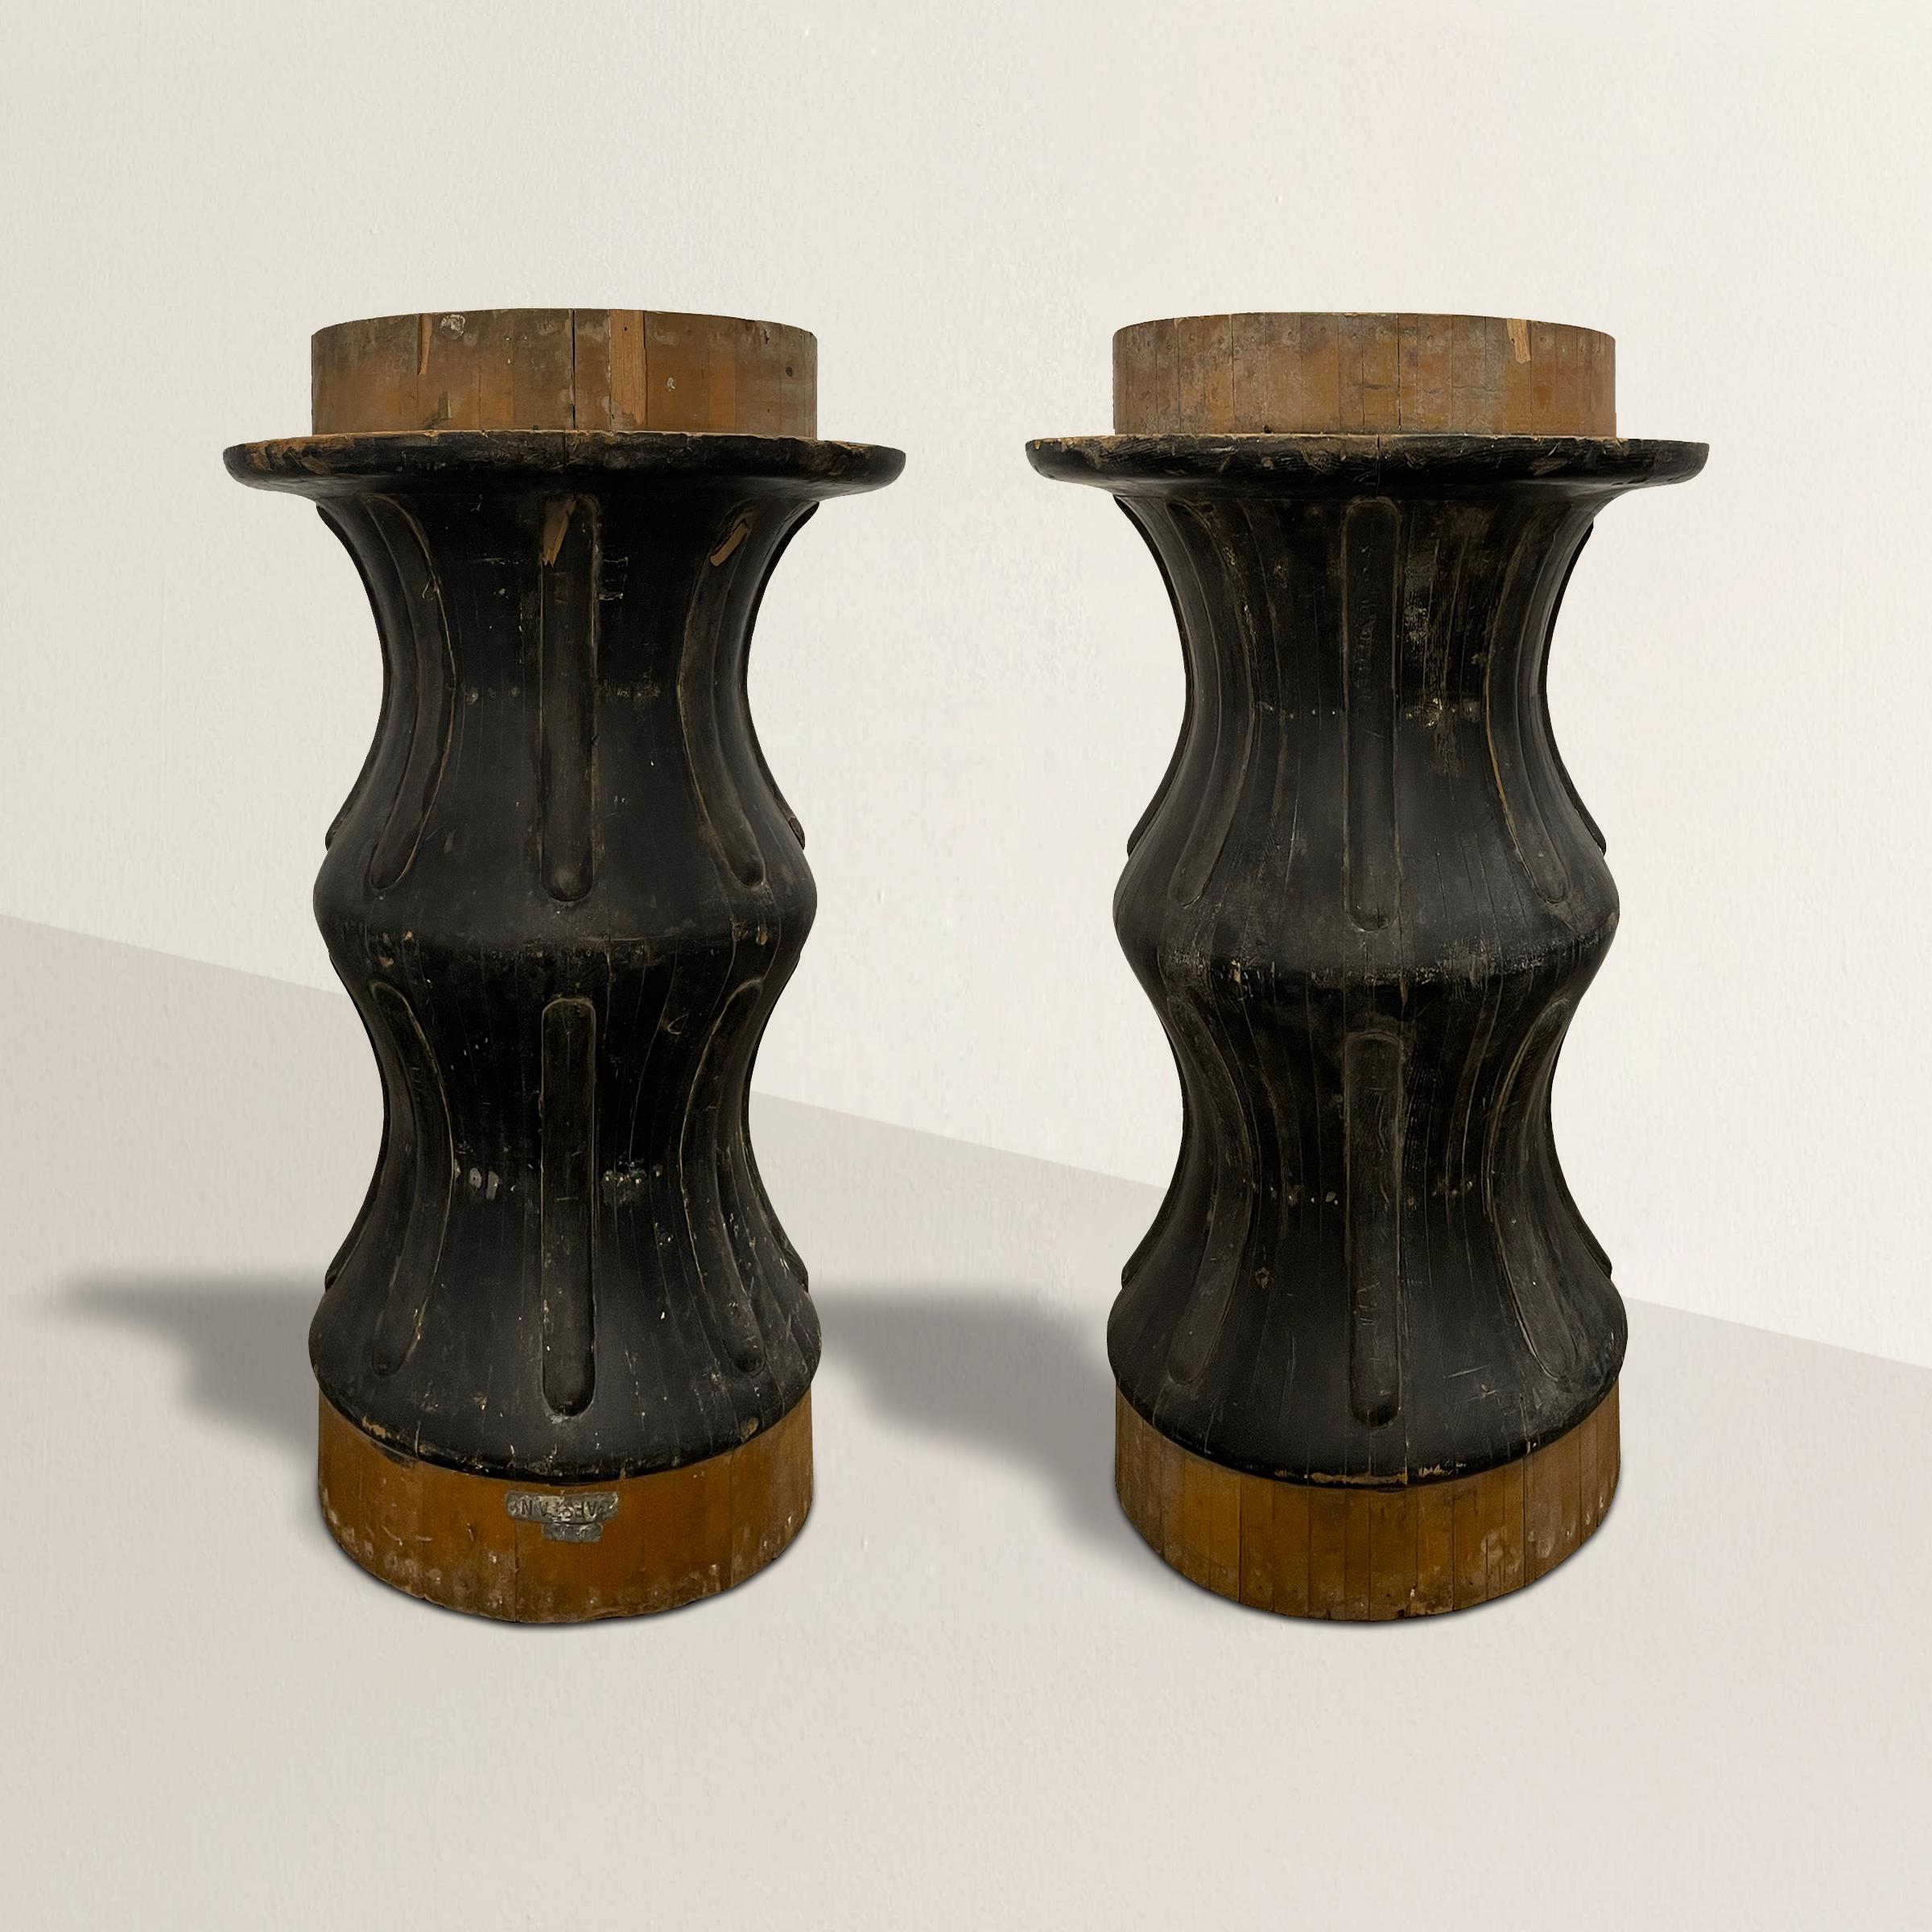 A bold and playful early 20th century American industrial mold from the ship yards of Sturgeon Bay, Wisconsin, and originally used to make parts for steamboats. Today it makes the most interesting pair of console tables or pedestals to flank a